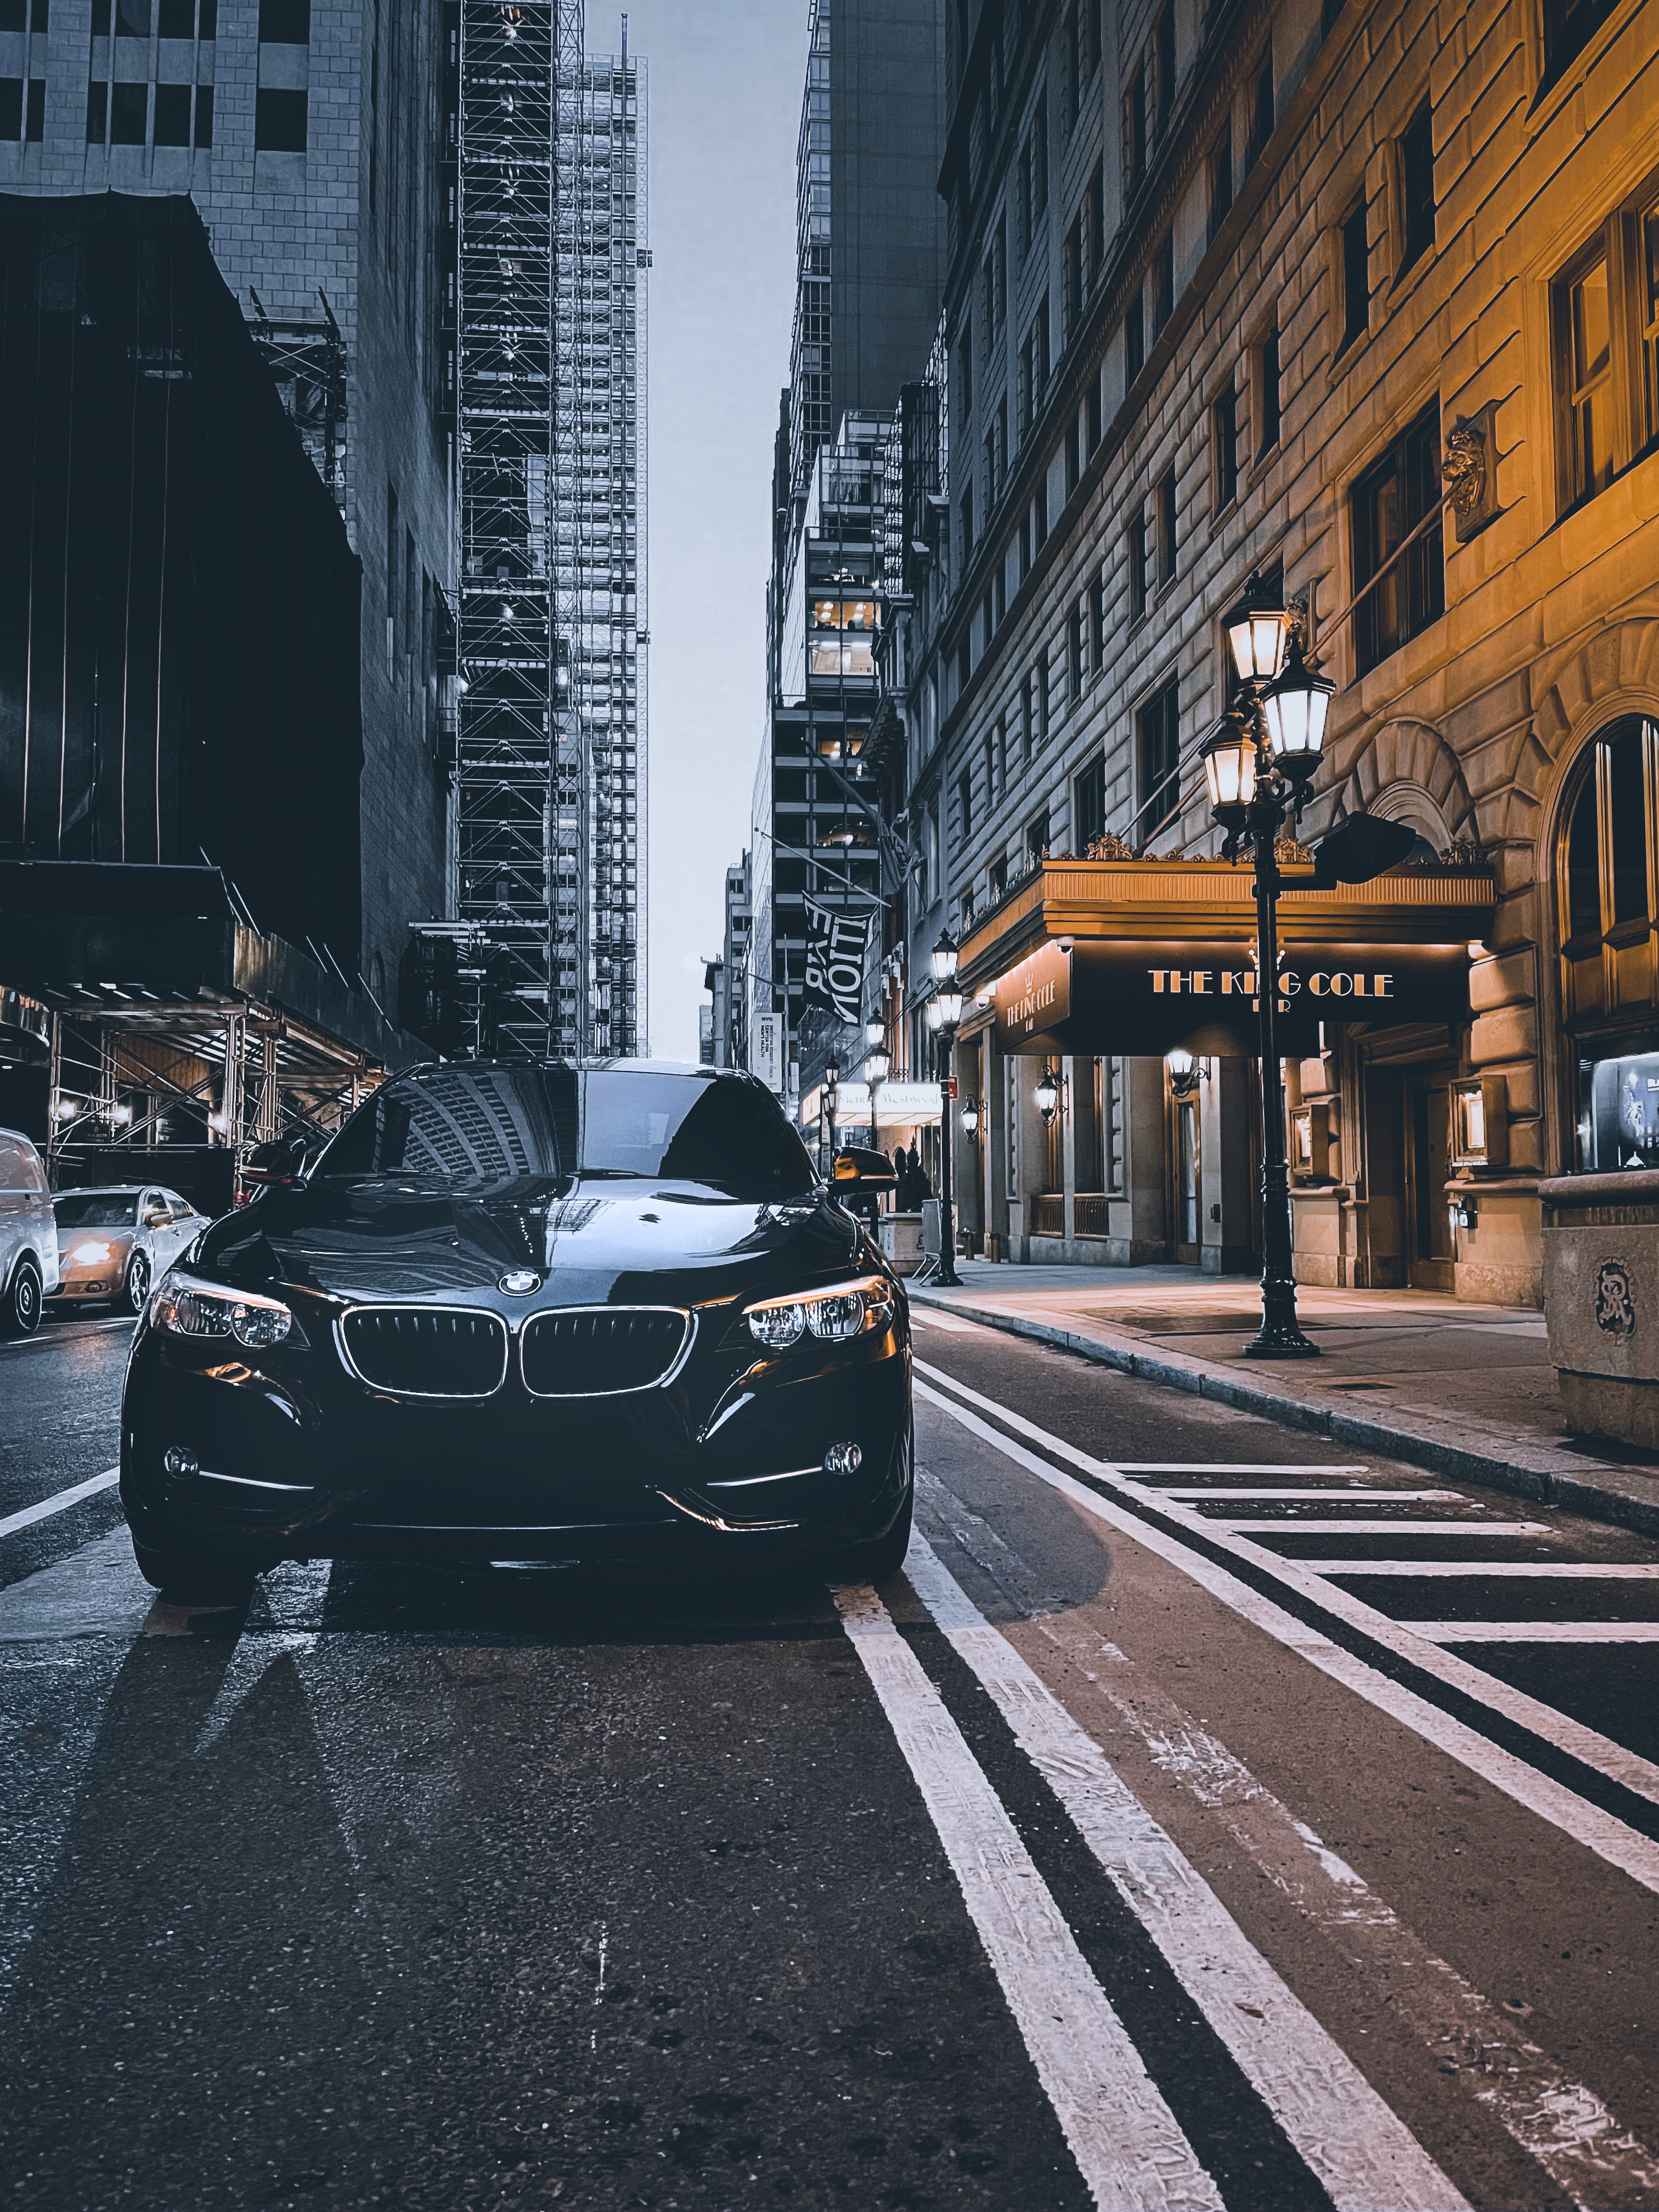 Best Mobile Bmw Backgrounds